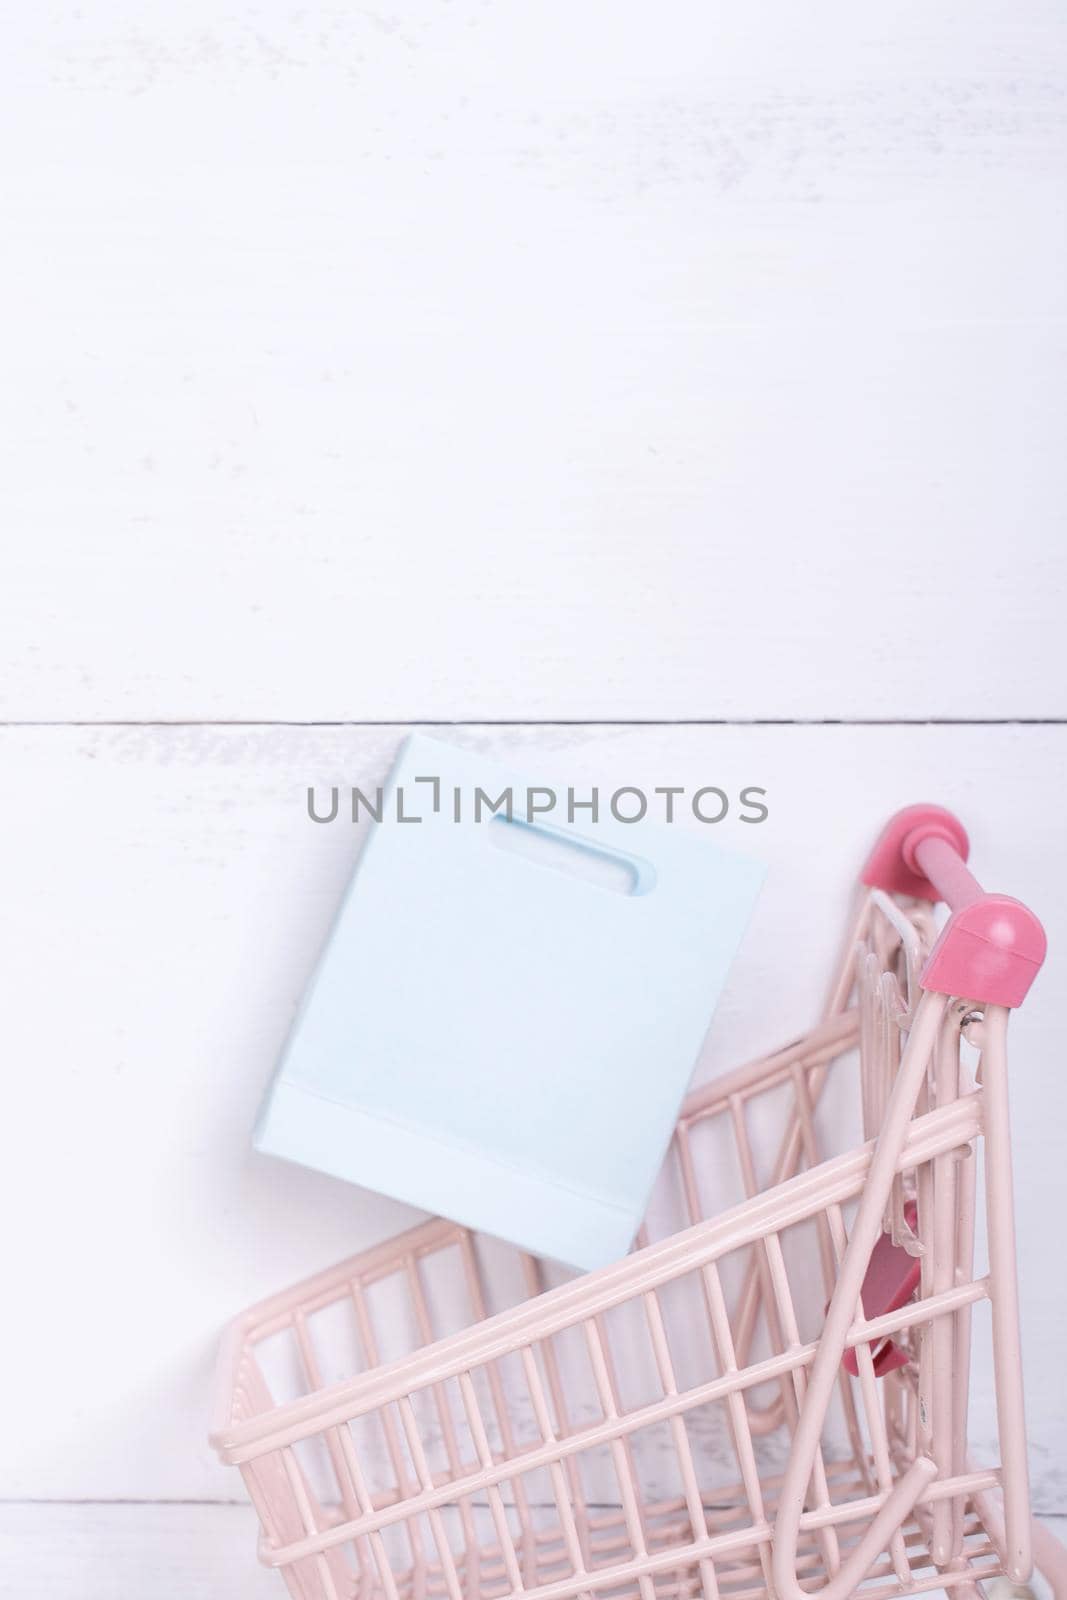 Abstract design element,annual sale,shopping season concept,mini cart with colorful paper bag on white wooden table background,top view,flat lay